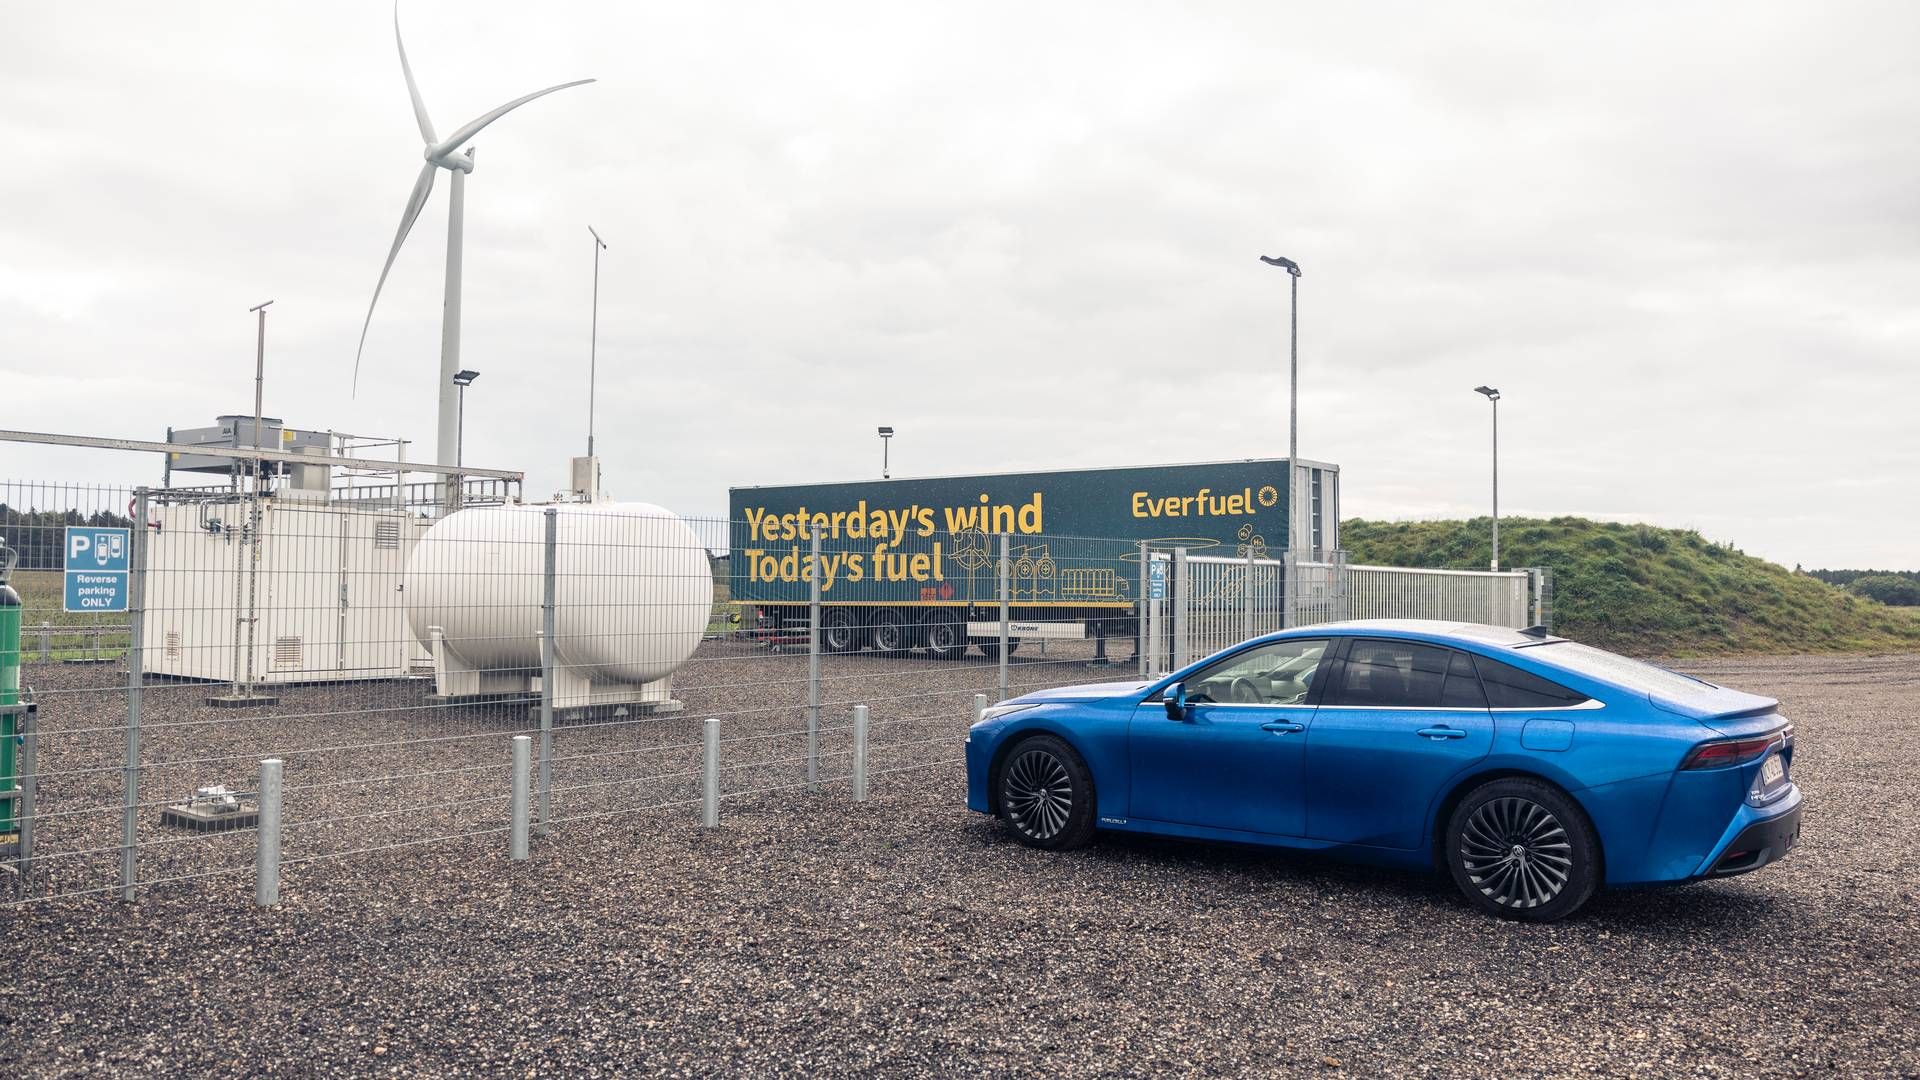 Siemens Gamesa's demonstration plant near Brande, where visitors can see how green hydrogen is produced. Everfuel makes green hydrogen that can be filled directly into the tank of a hydrogen car like this Mirai. | Photo: Anders Holst Pedersen